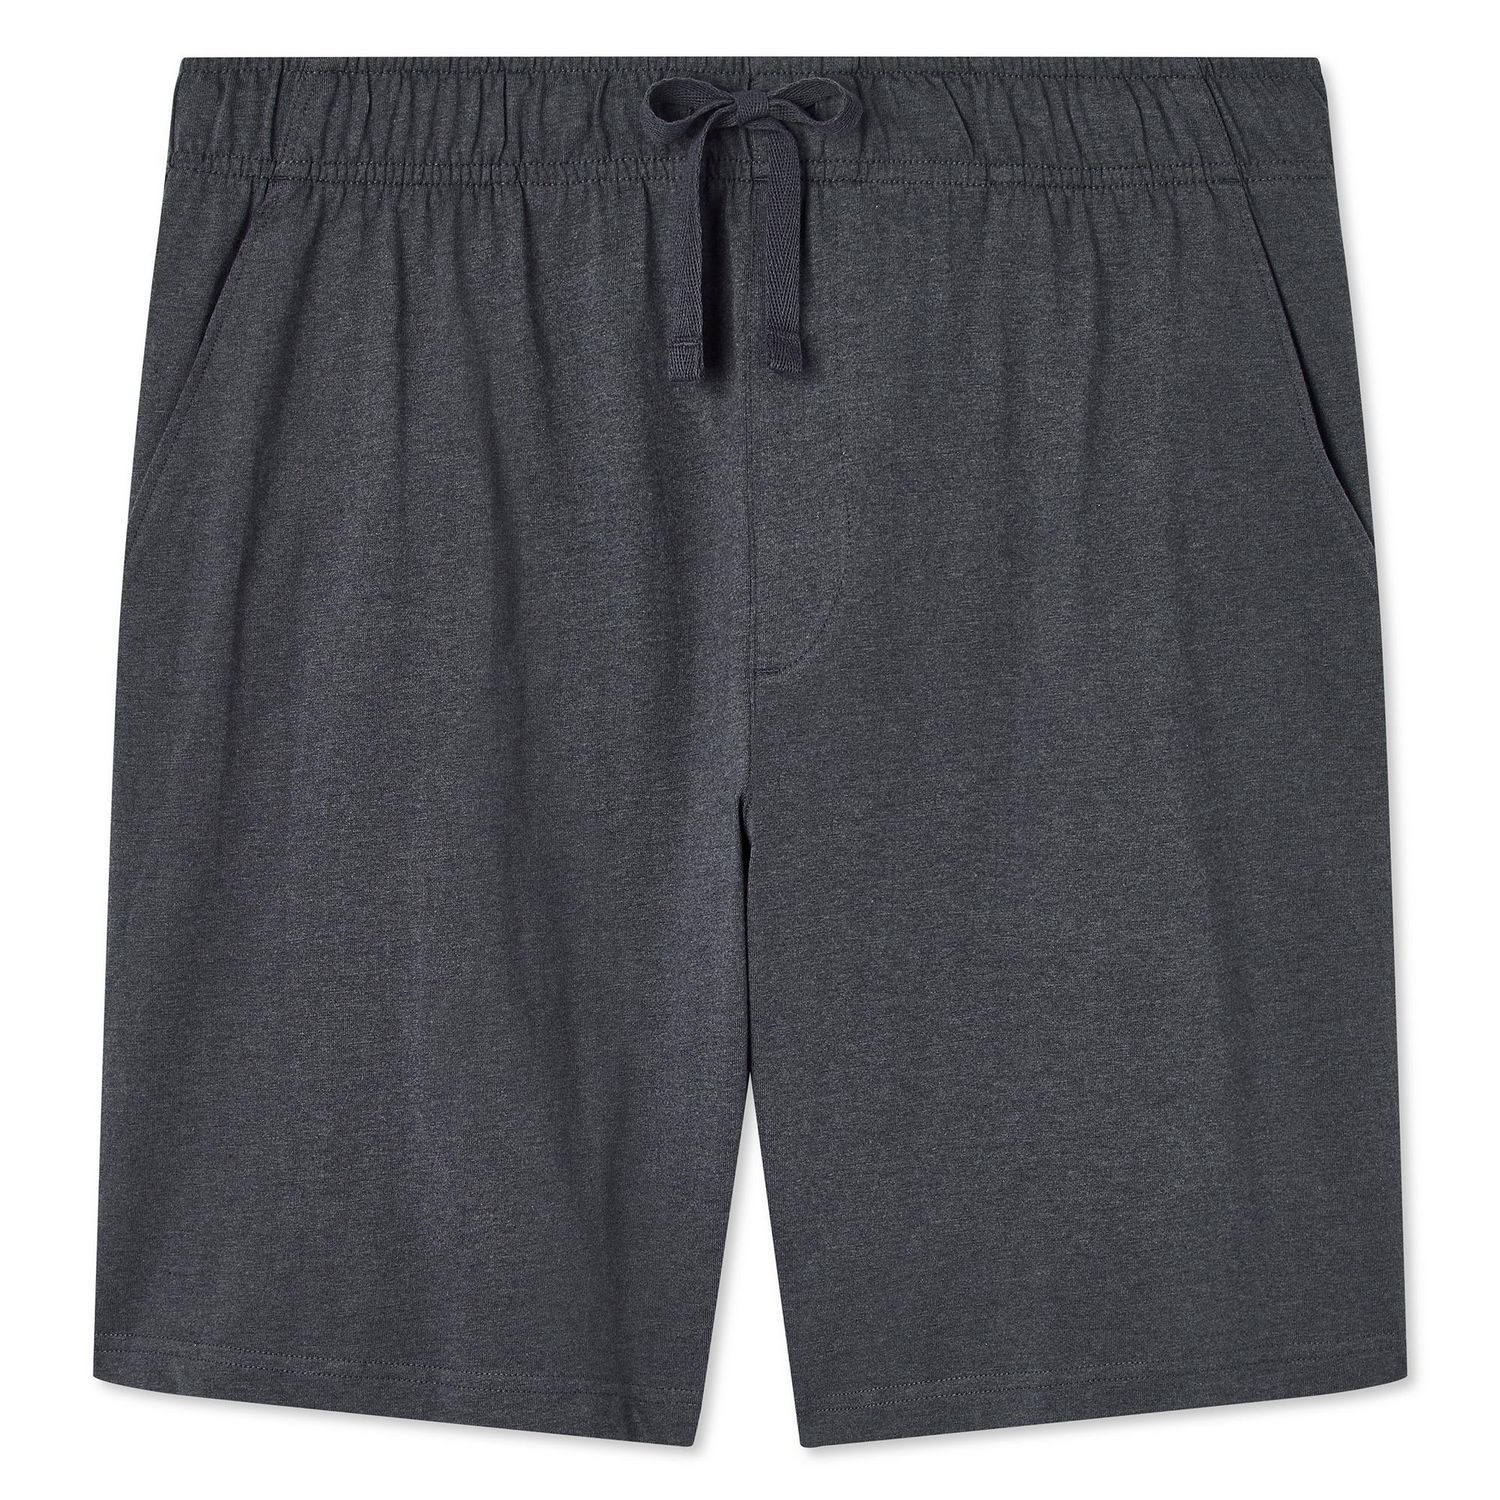 Print Woven Cotton Sleep Shorts 2 Pack offer at Woolworths